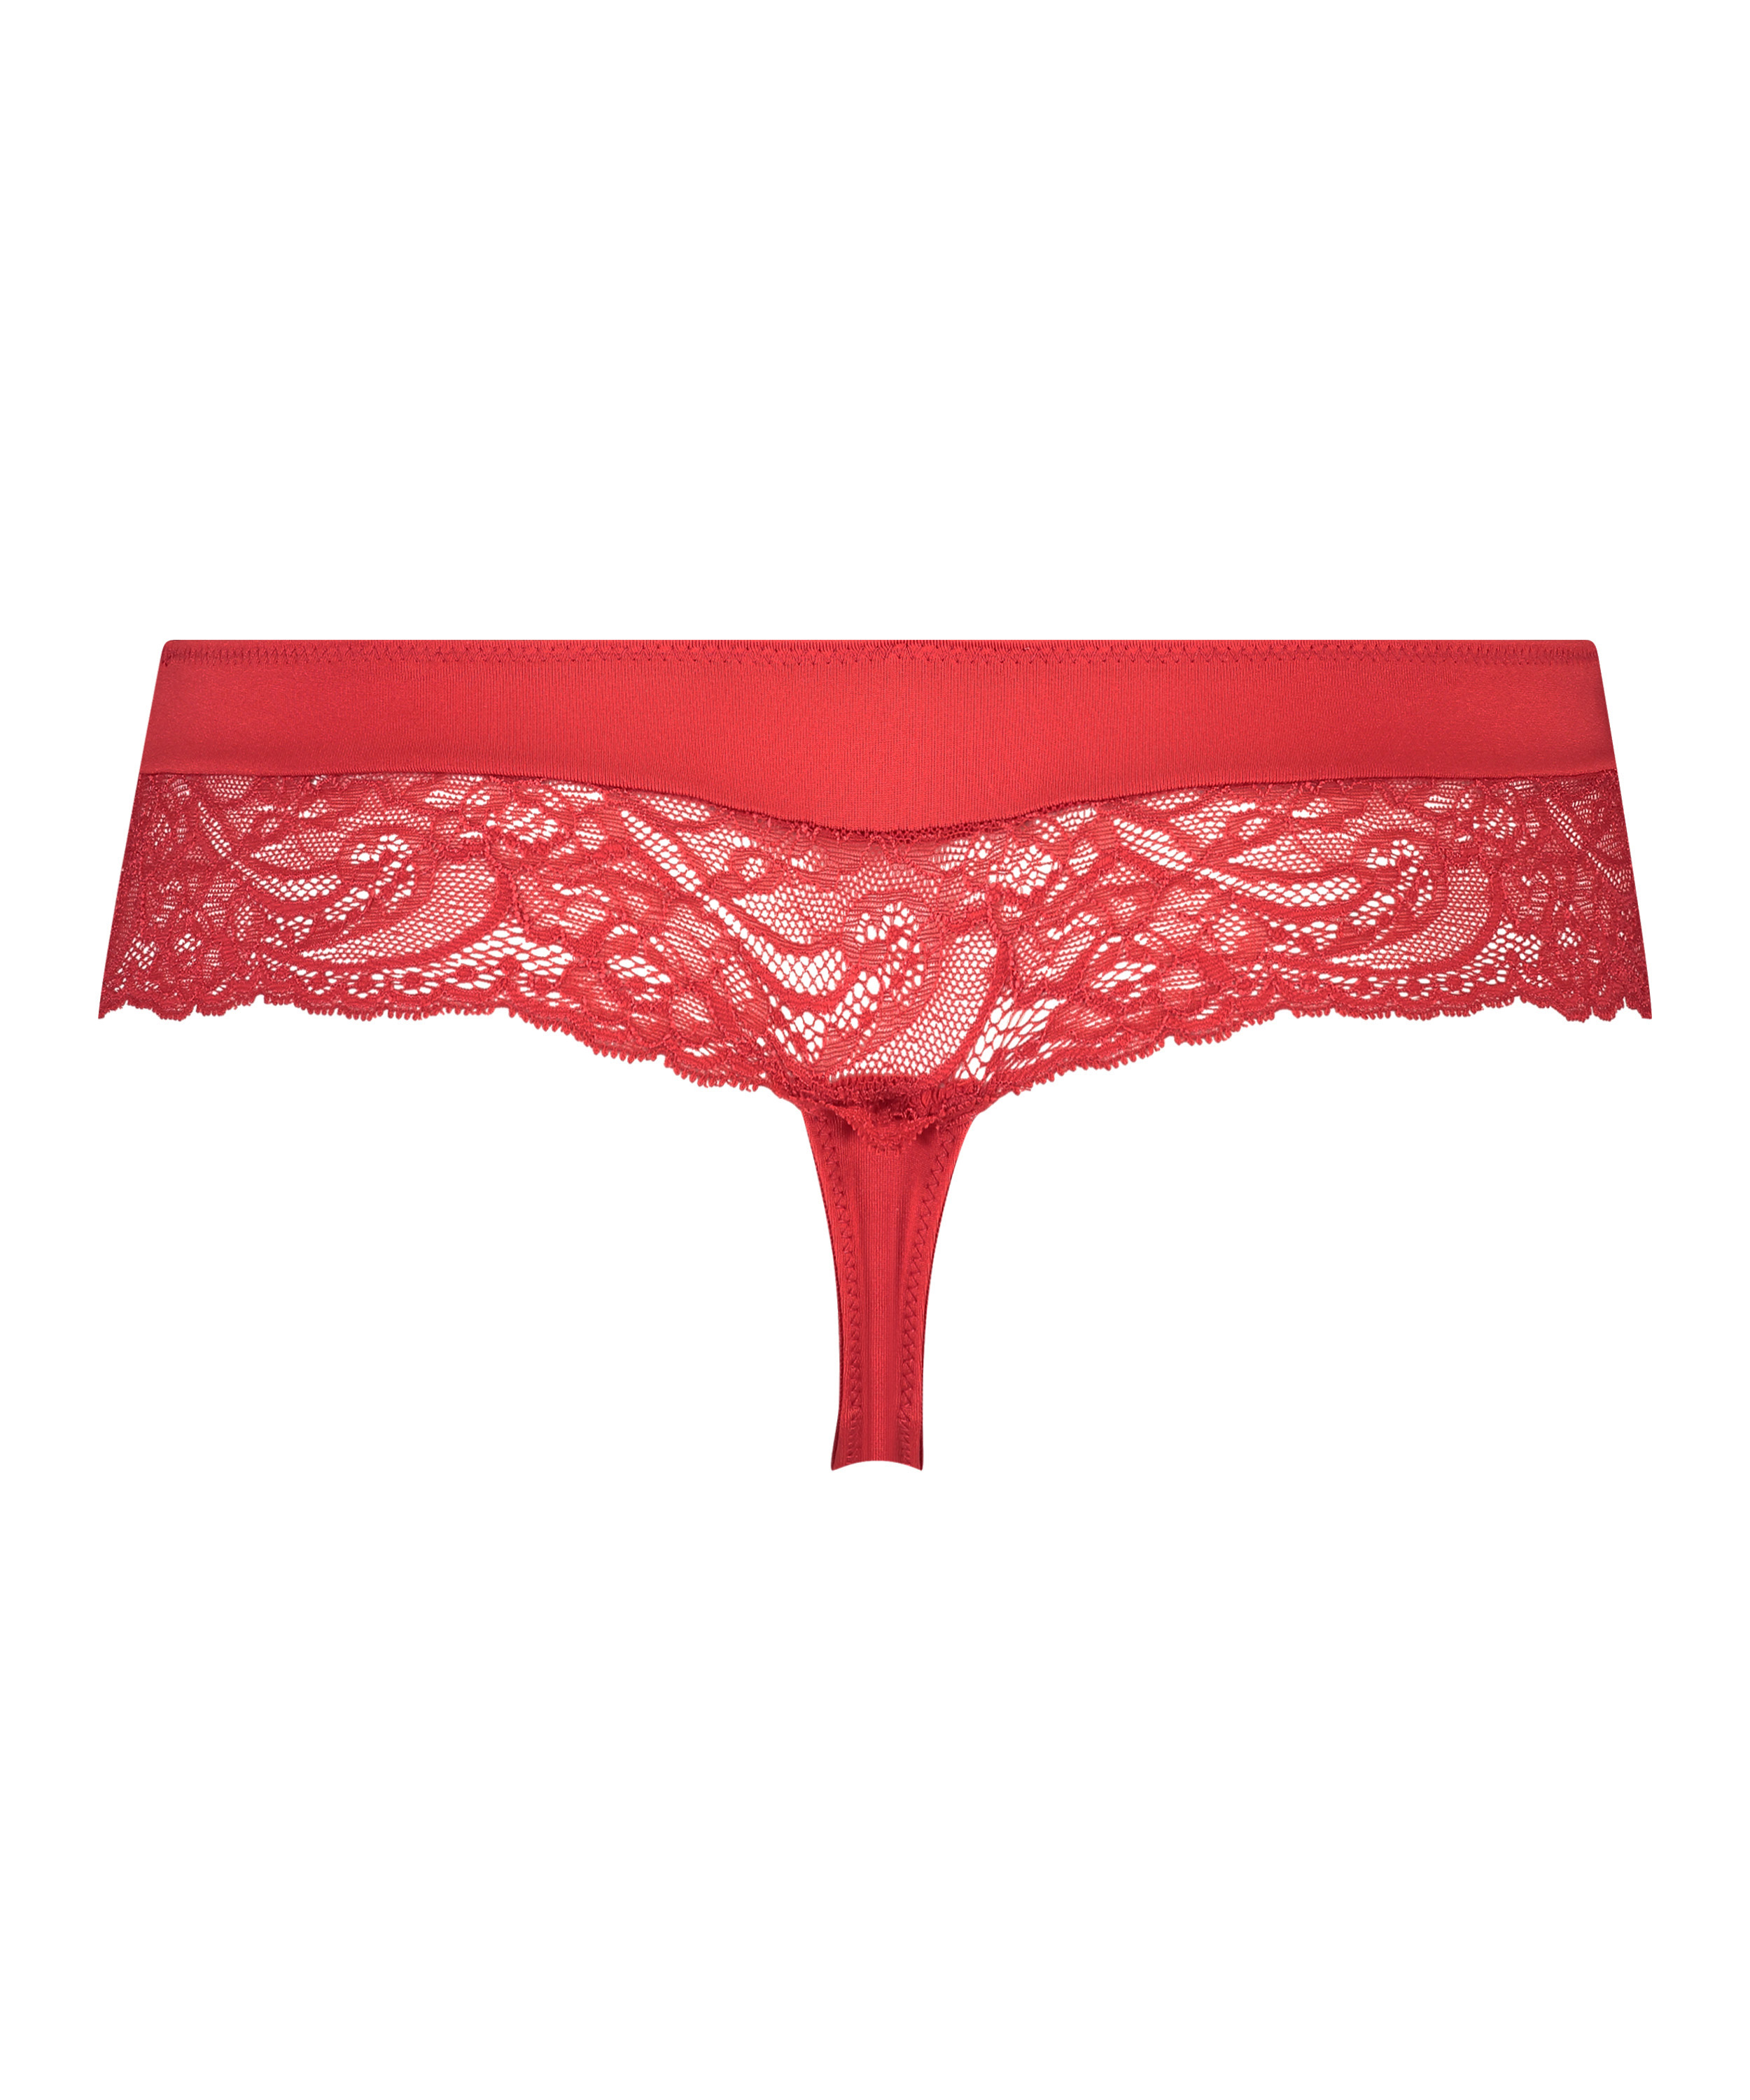 Boxer string Sophie, Rouge, main